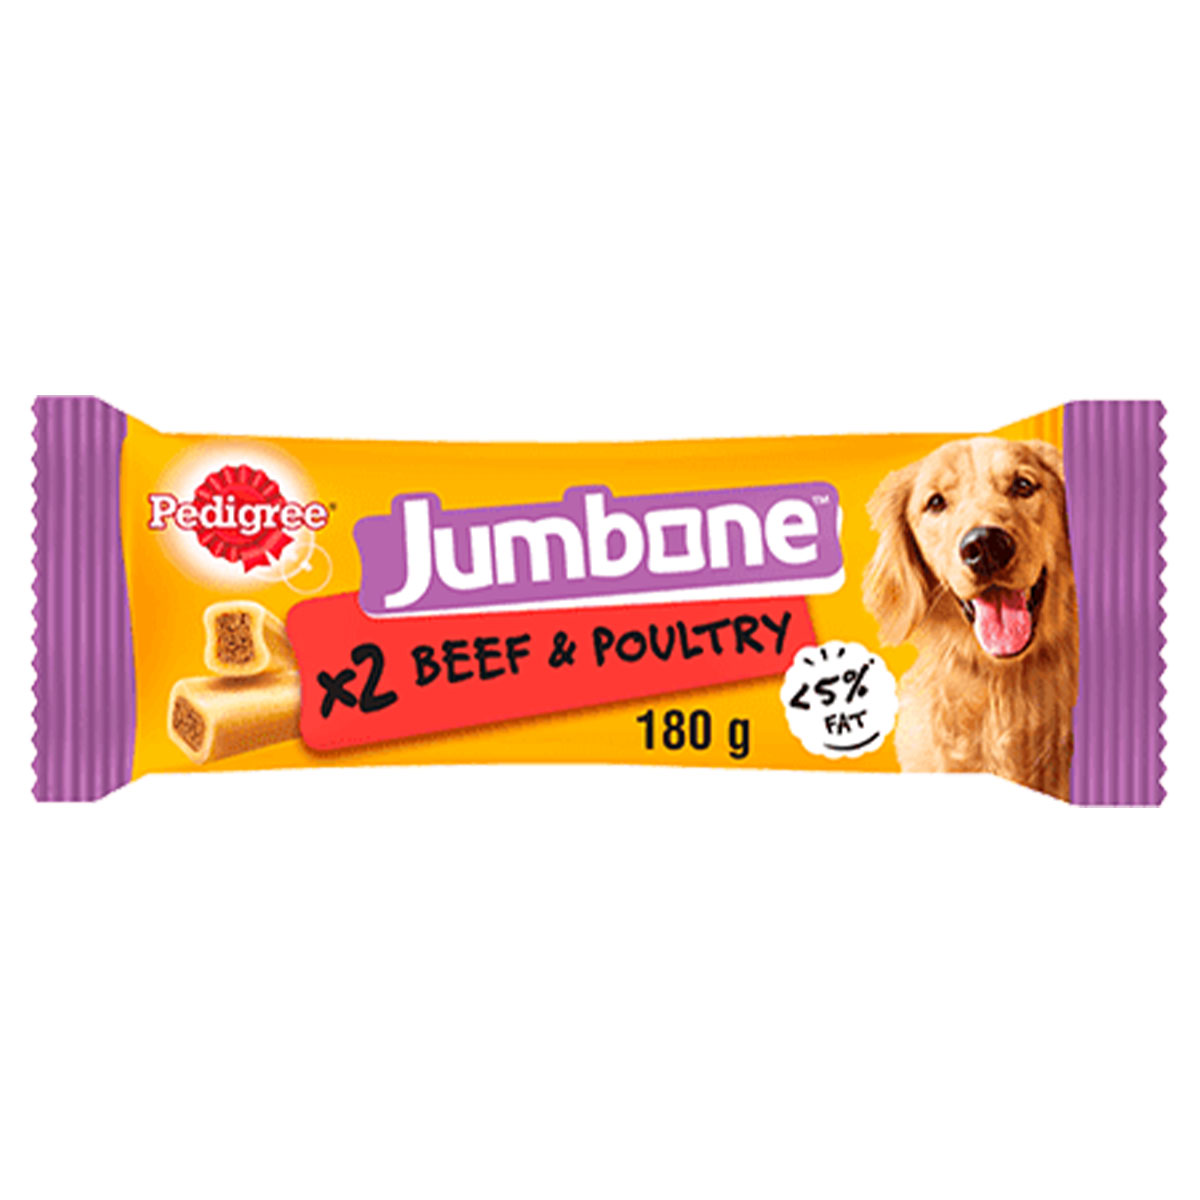 Pedigree - Jumbone Beef & Poultry - 180g - Continental Food Store